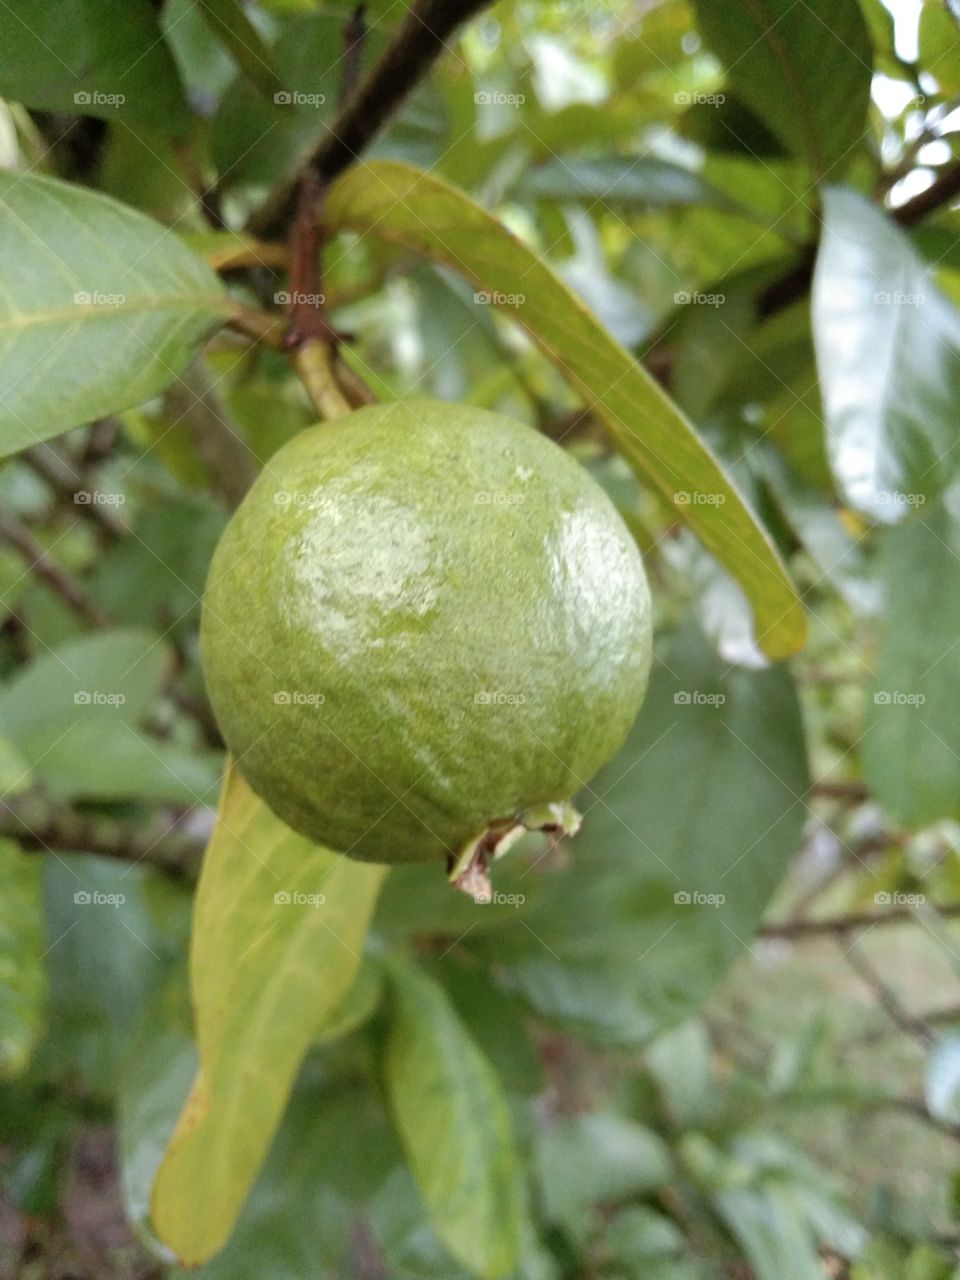 A Very Beautiful Guava, and, with Guava
Tree.